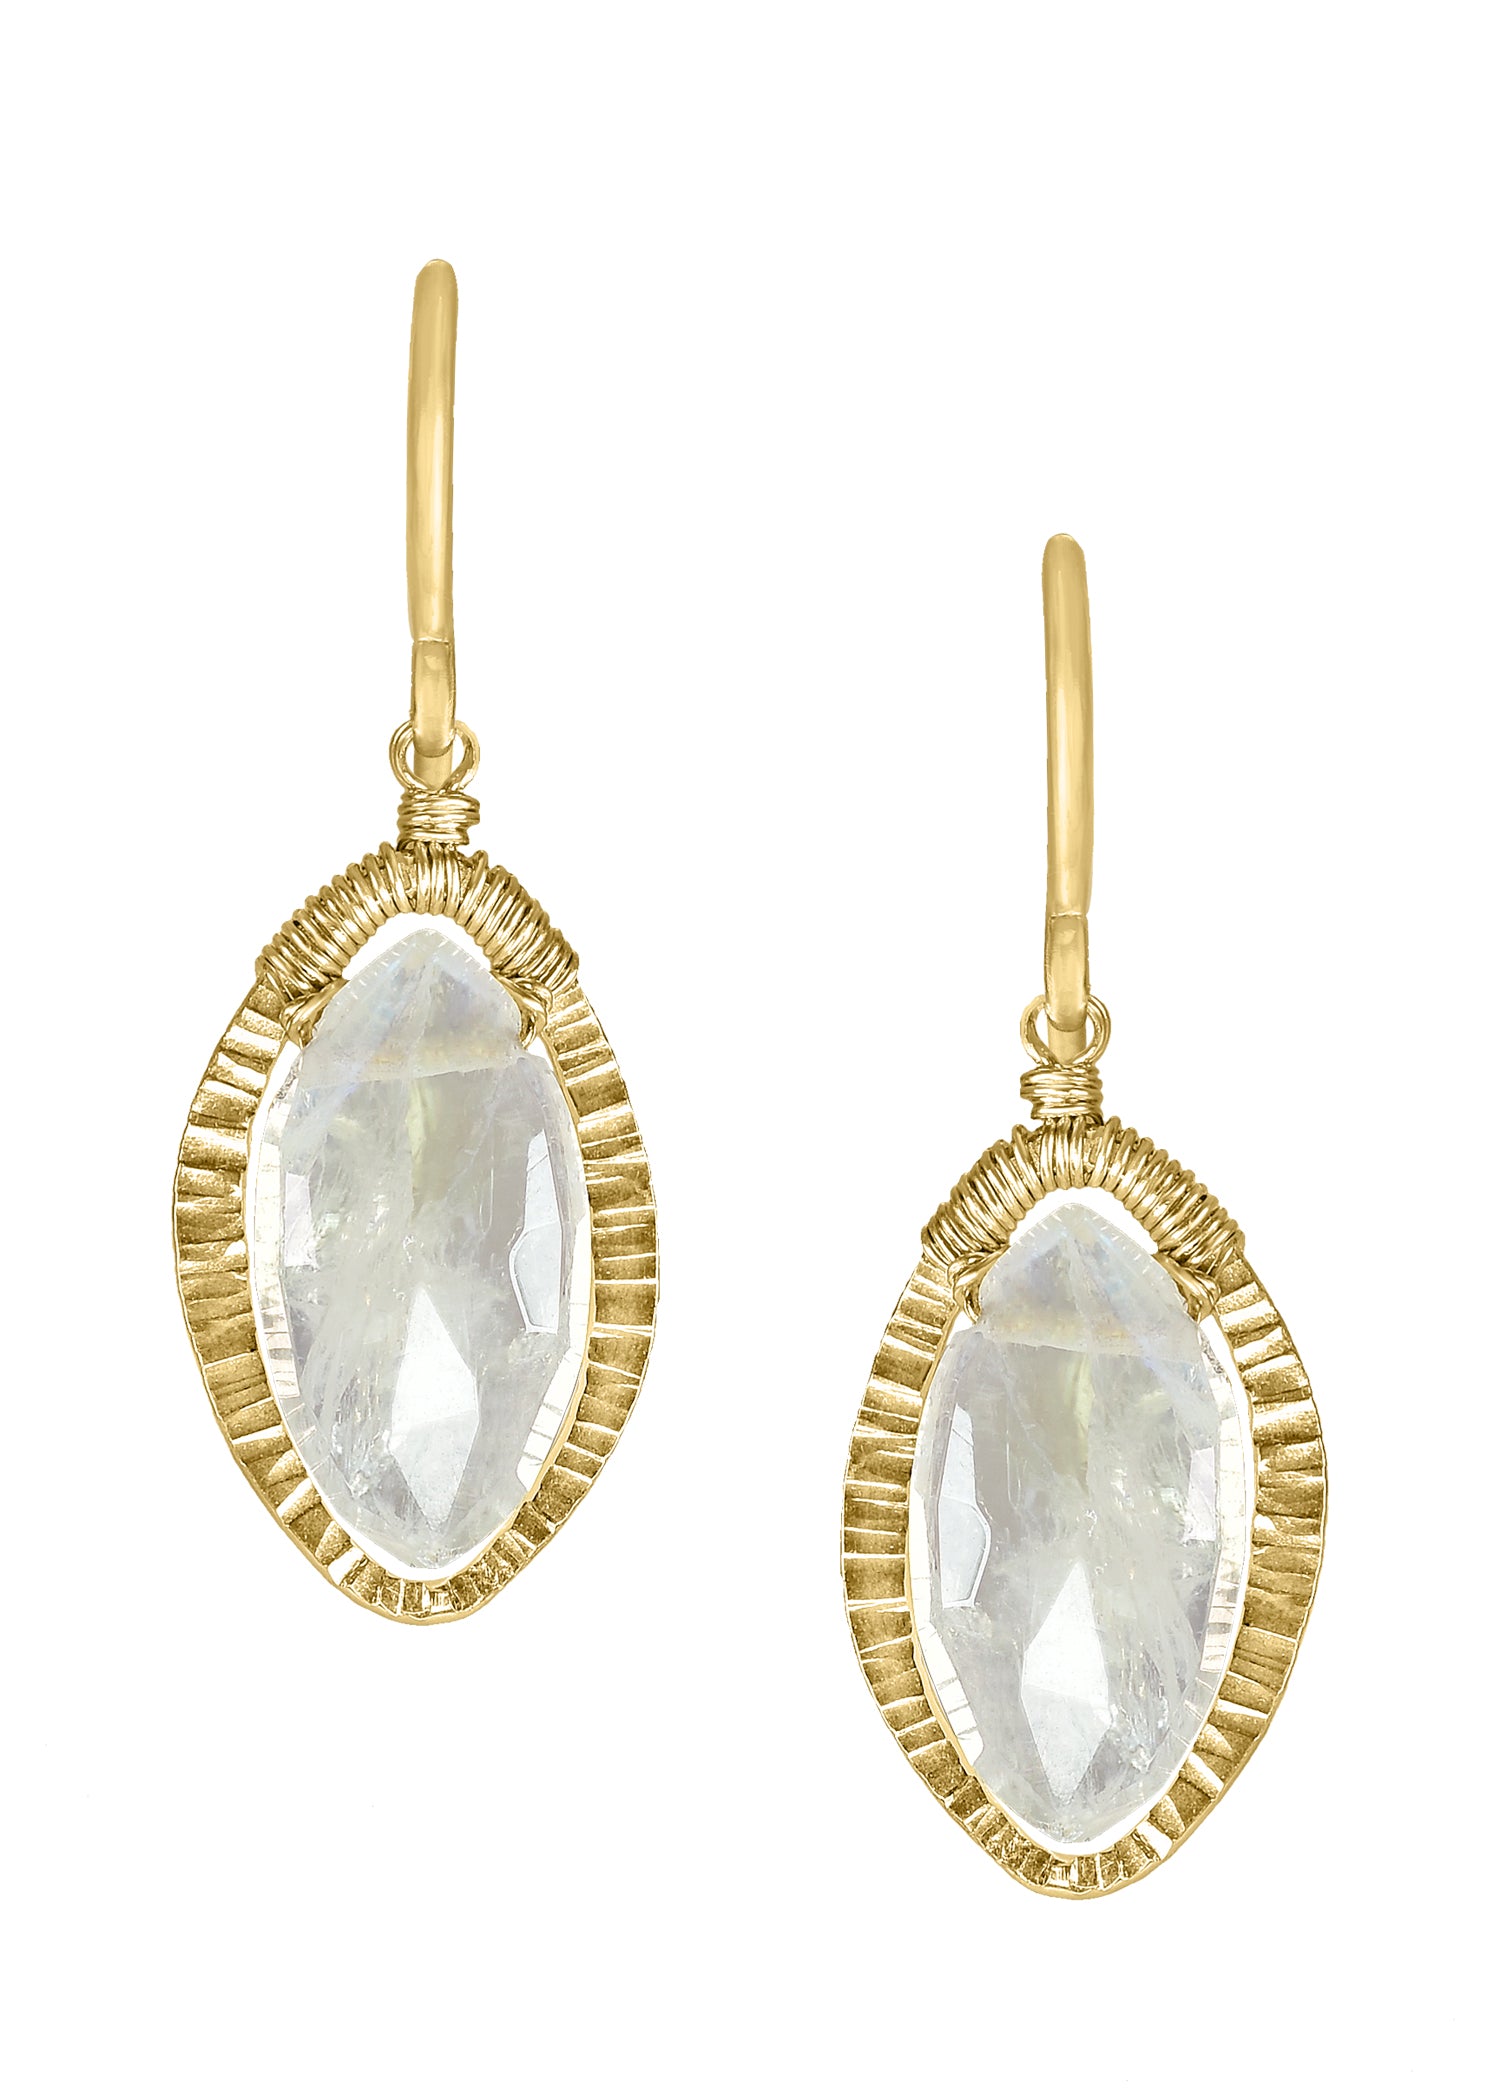 Rainbow moonstone 14k gold fill Earrings measure 1-1/8" in length and 3/8" in width at the widest point Handmade in our Los Angeles studio